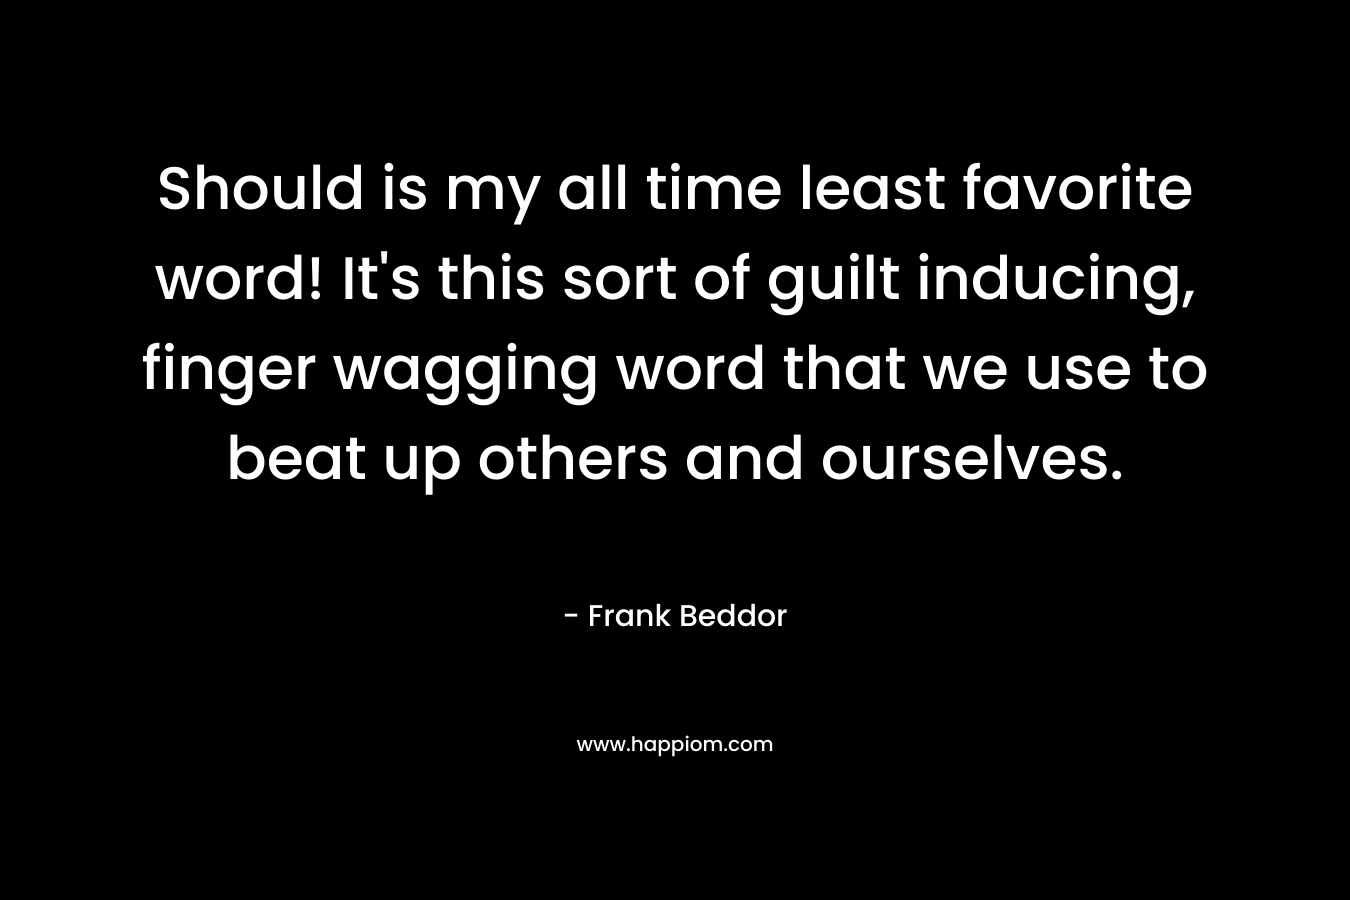 Should is my all time least favorite word! It’s this sort of guilt inducing, finger wagging word that we use to beat up others and ourselves. – Frank Beddor